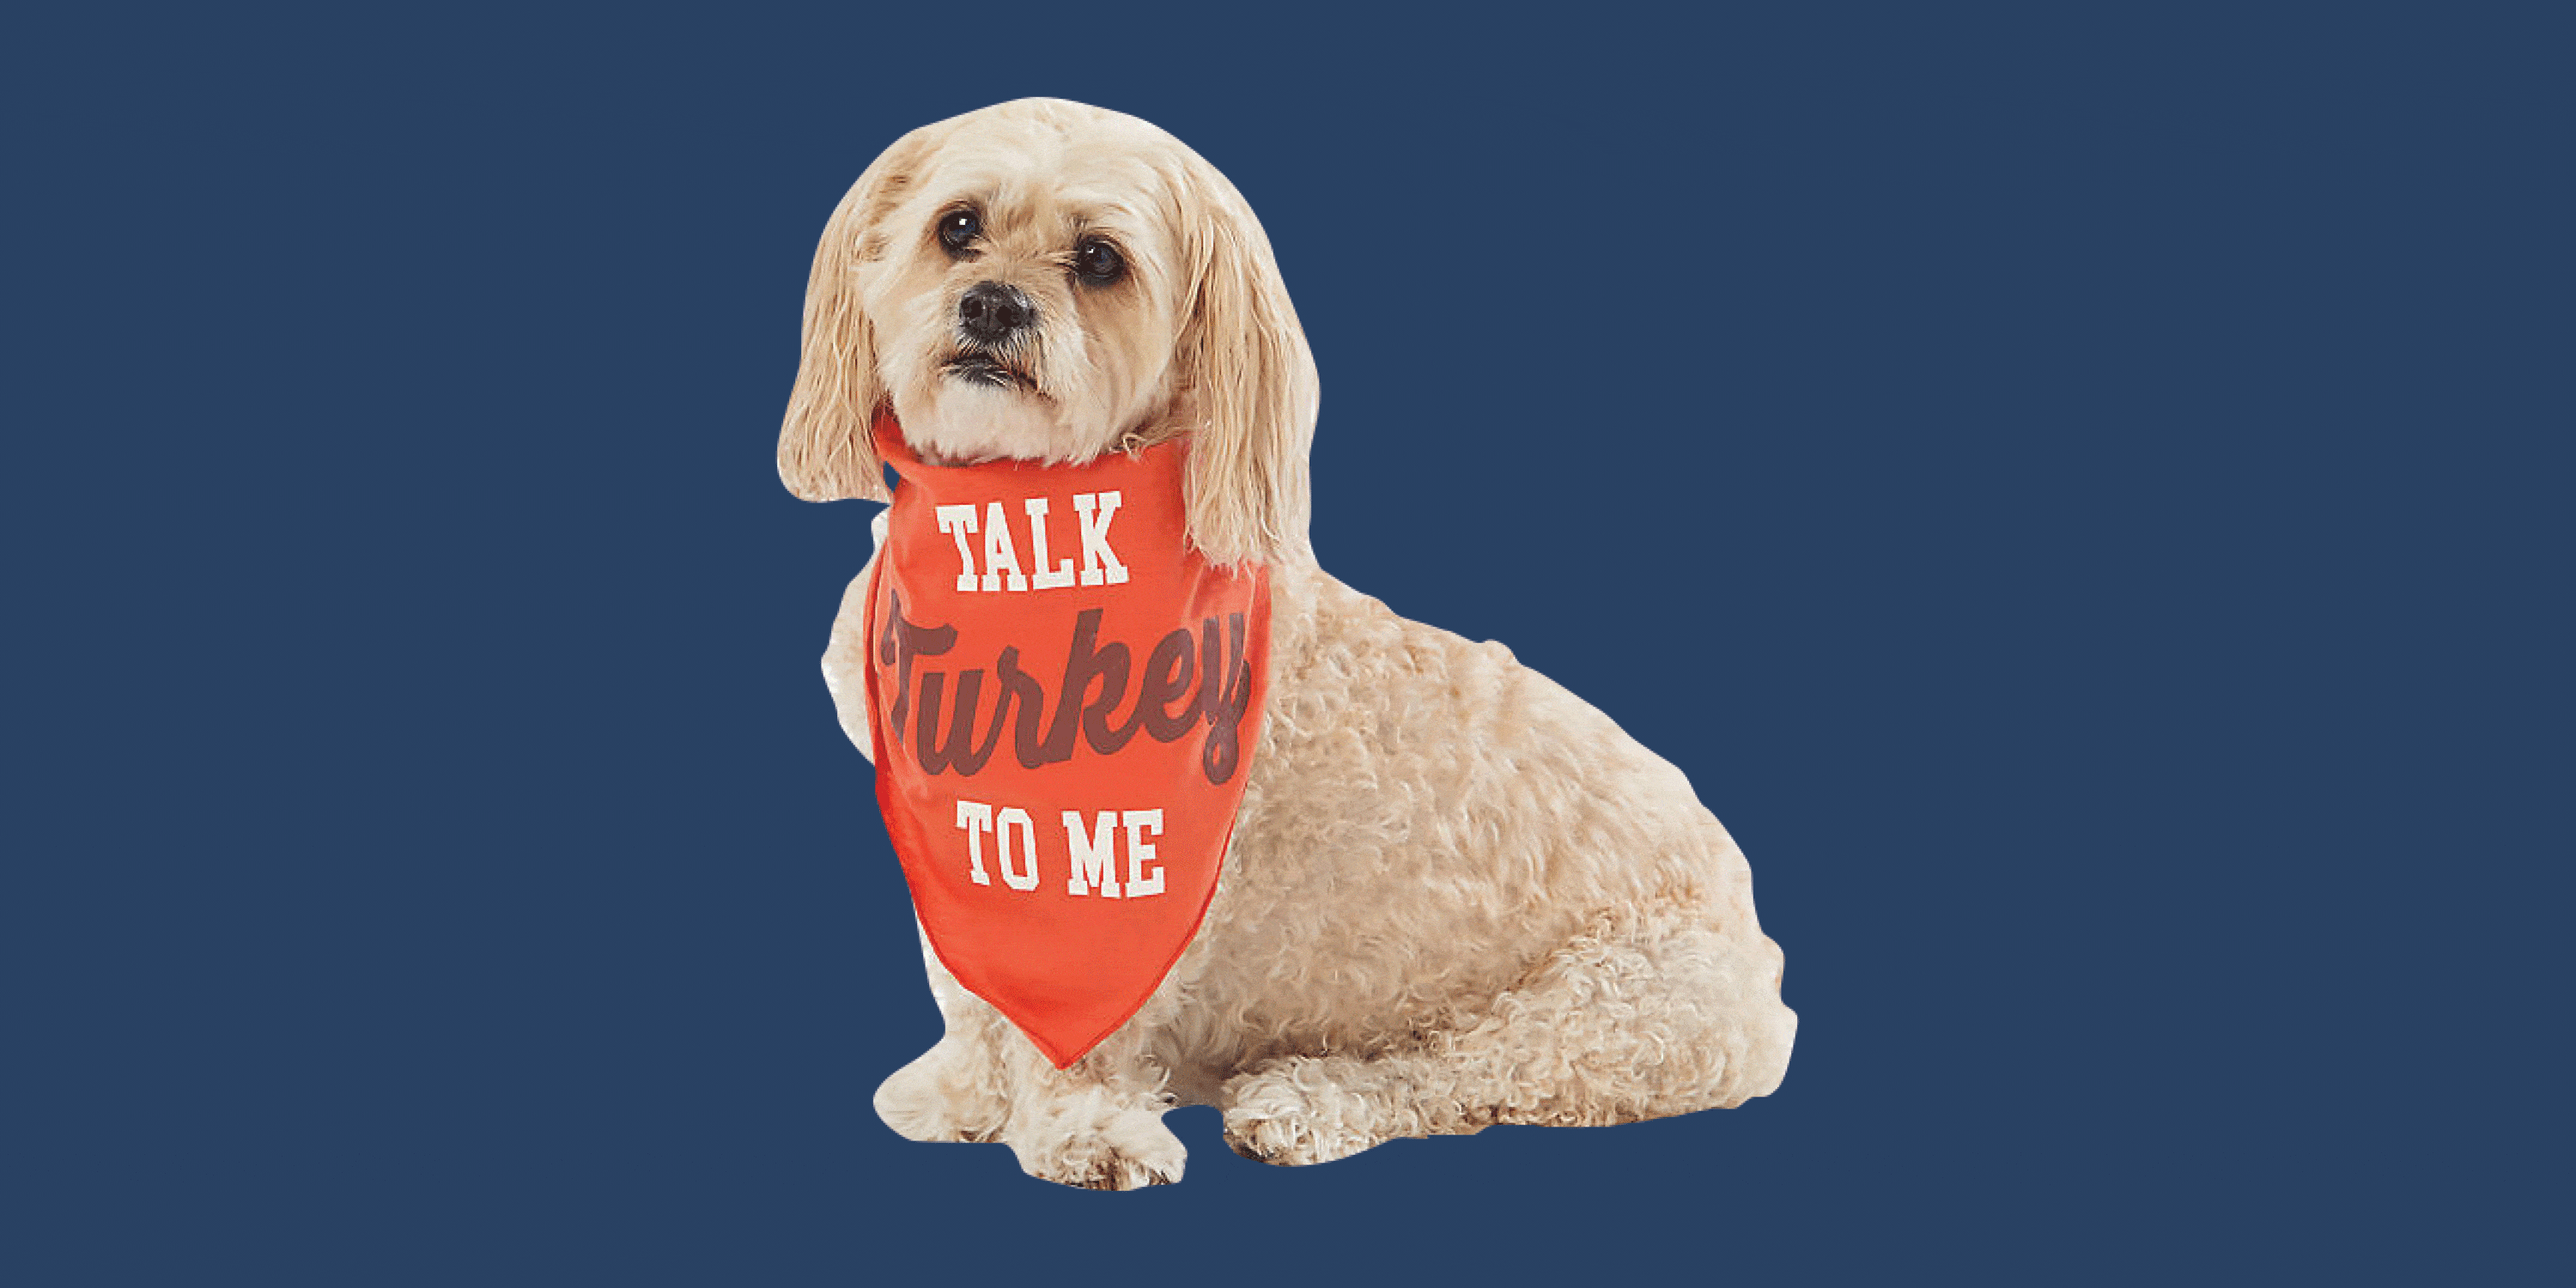 PetSmart Has Cute New Thanksgiving Costumes for Dogs